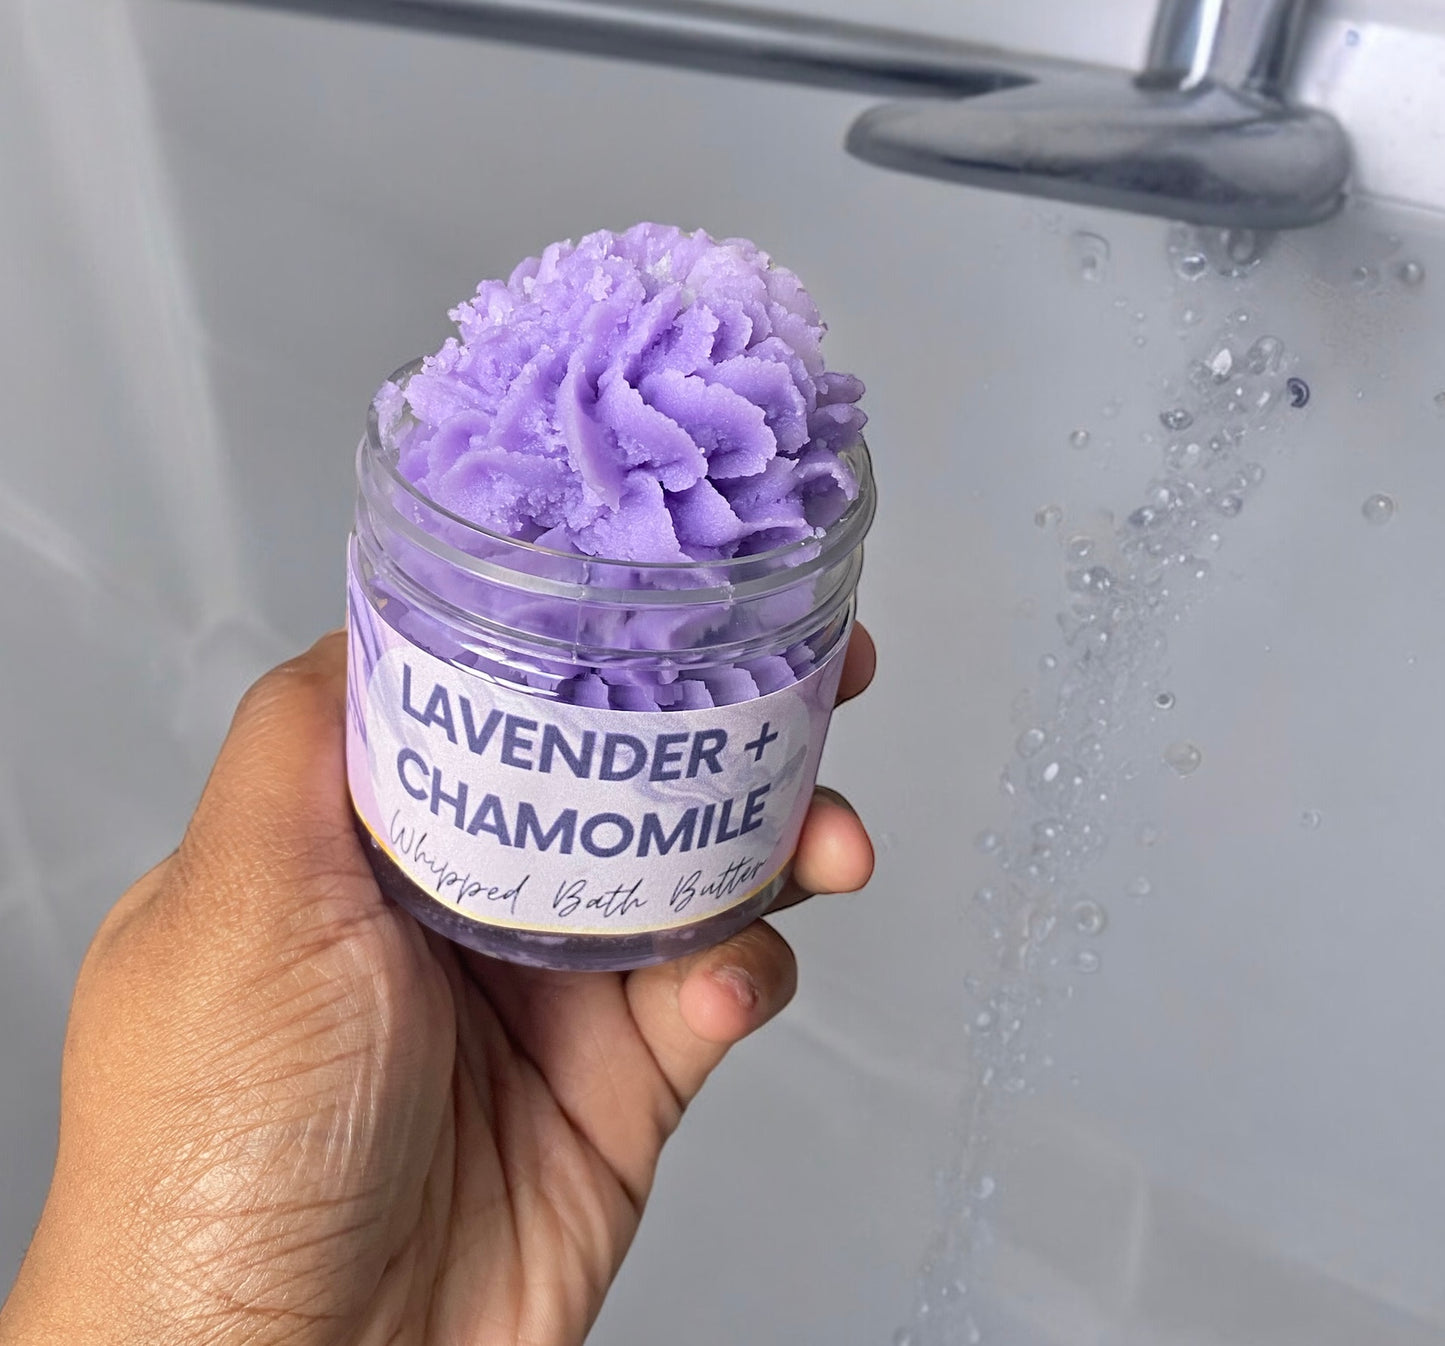 Lavender + Chamomile Whipped Bath Butter